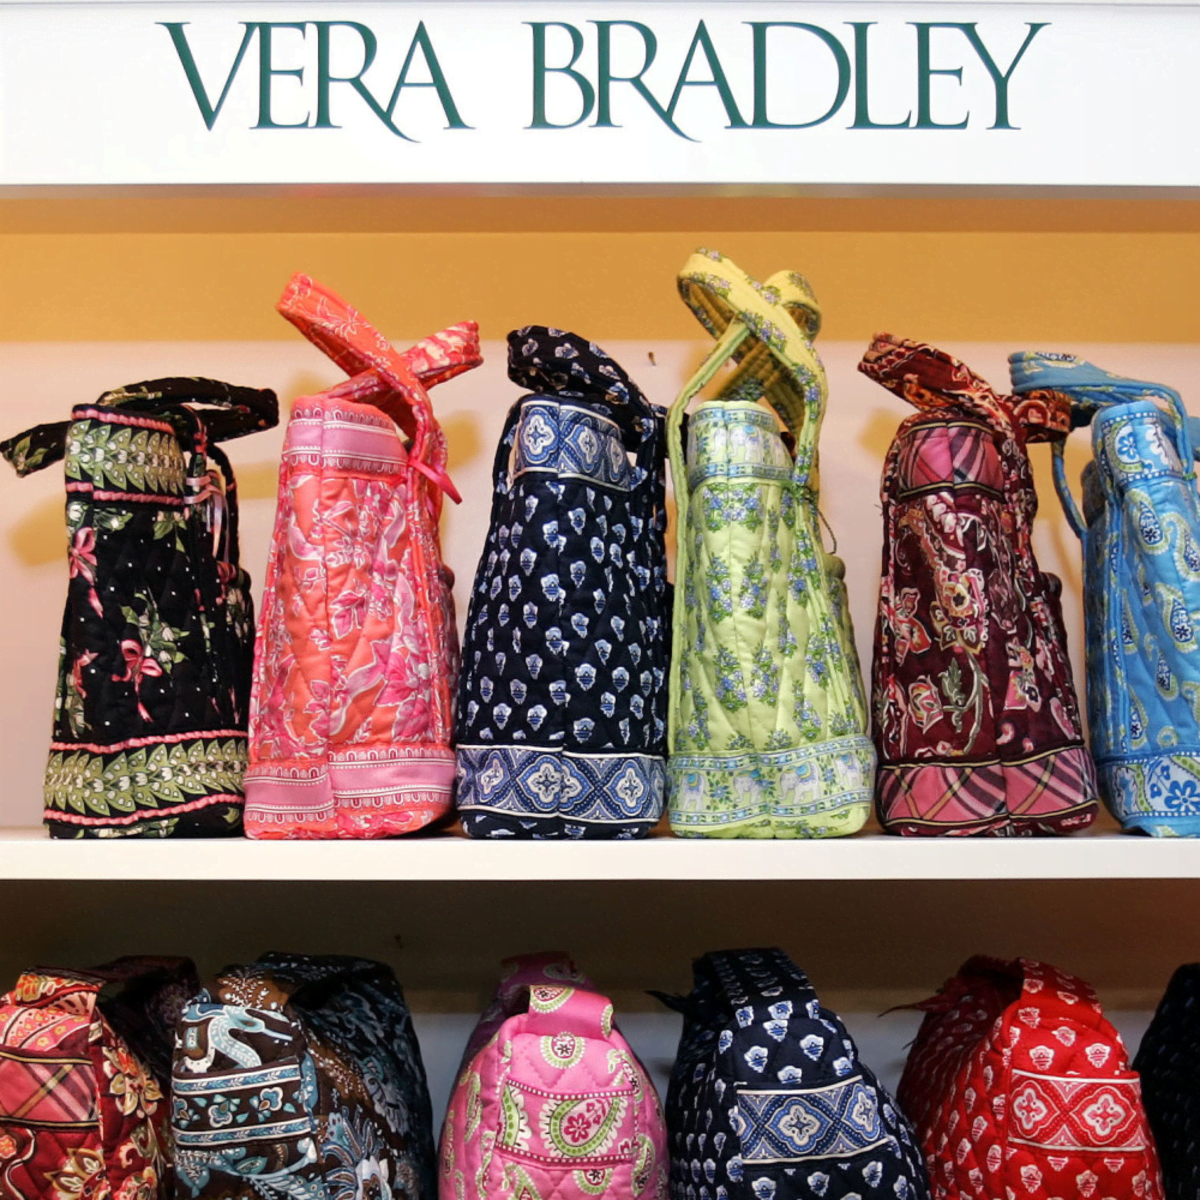 Vera Bradley Bags for sale in Rochester, New York | Facebook Marketplace |  Facebook